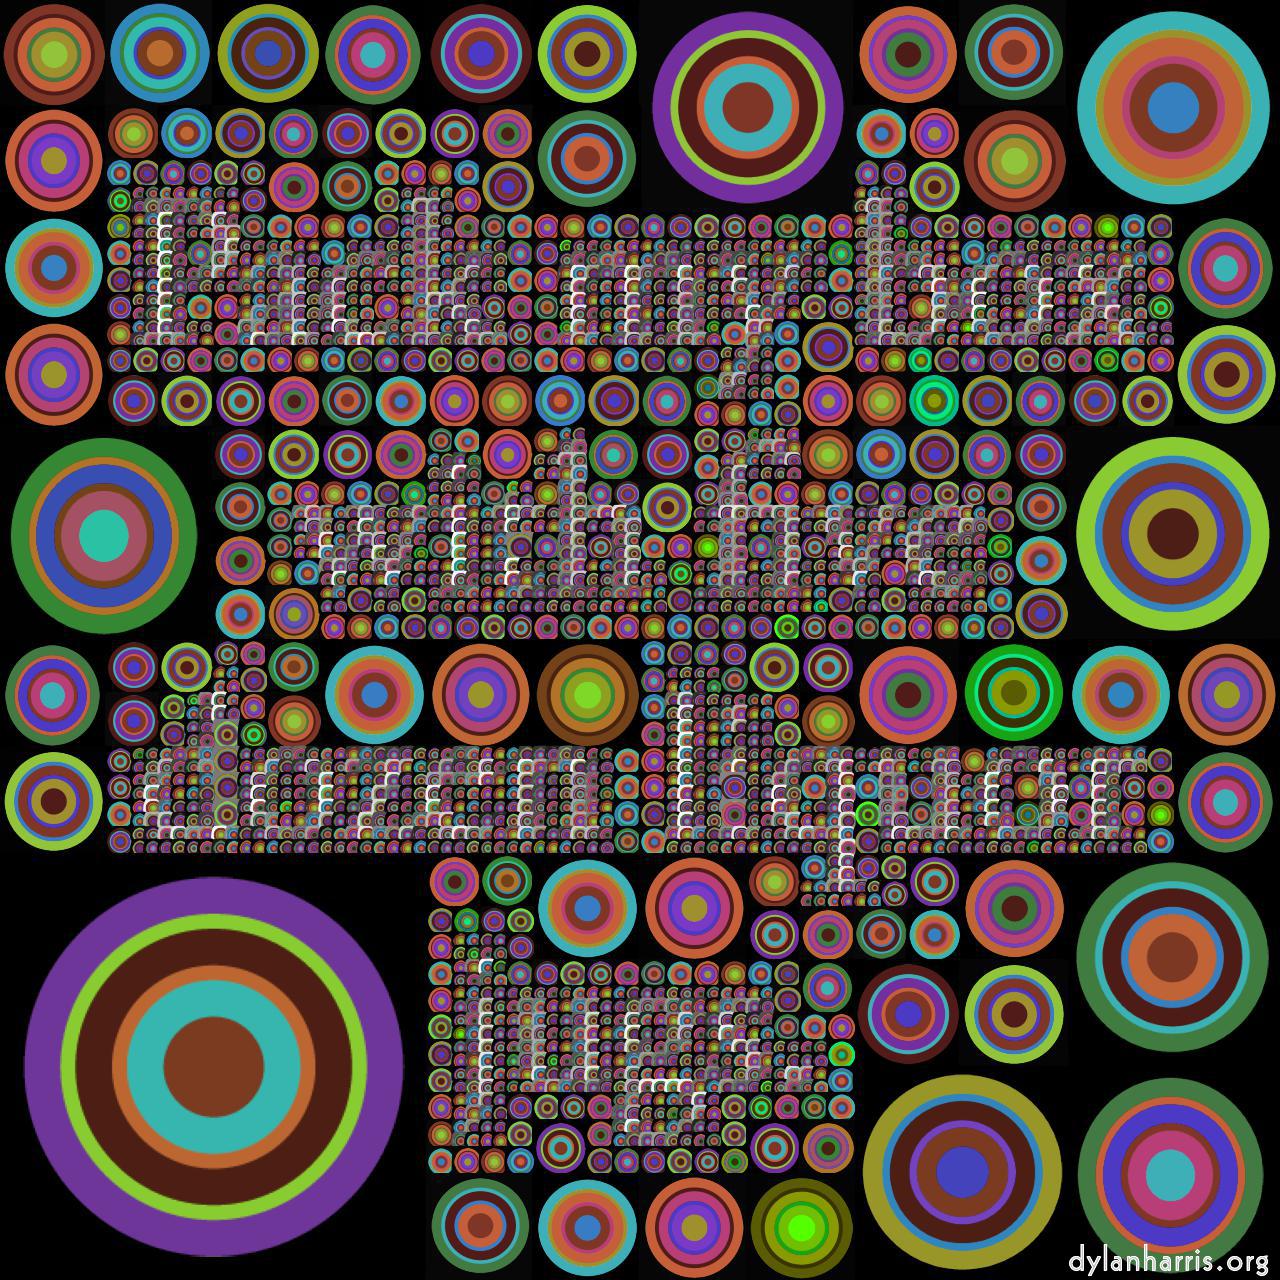 mosaic - image folder - try your own images :: alpha png images—colourised with vector palettised